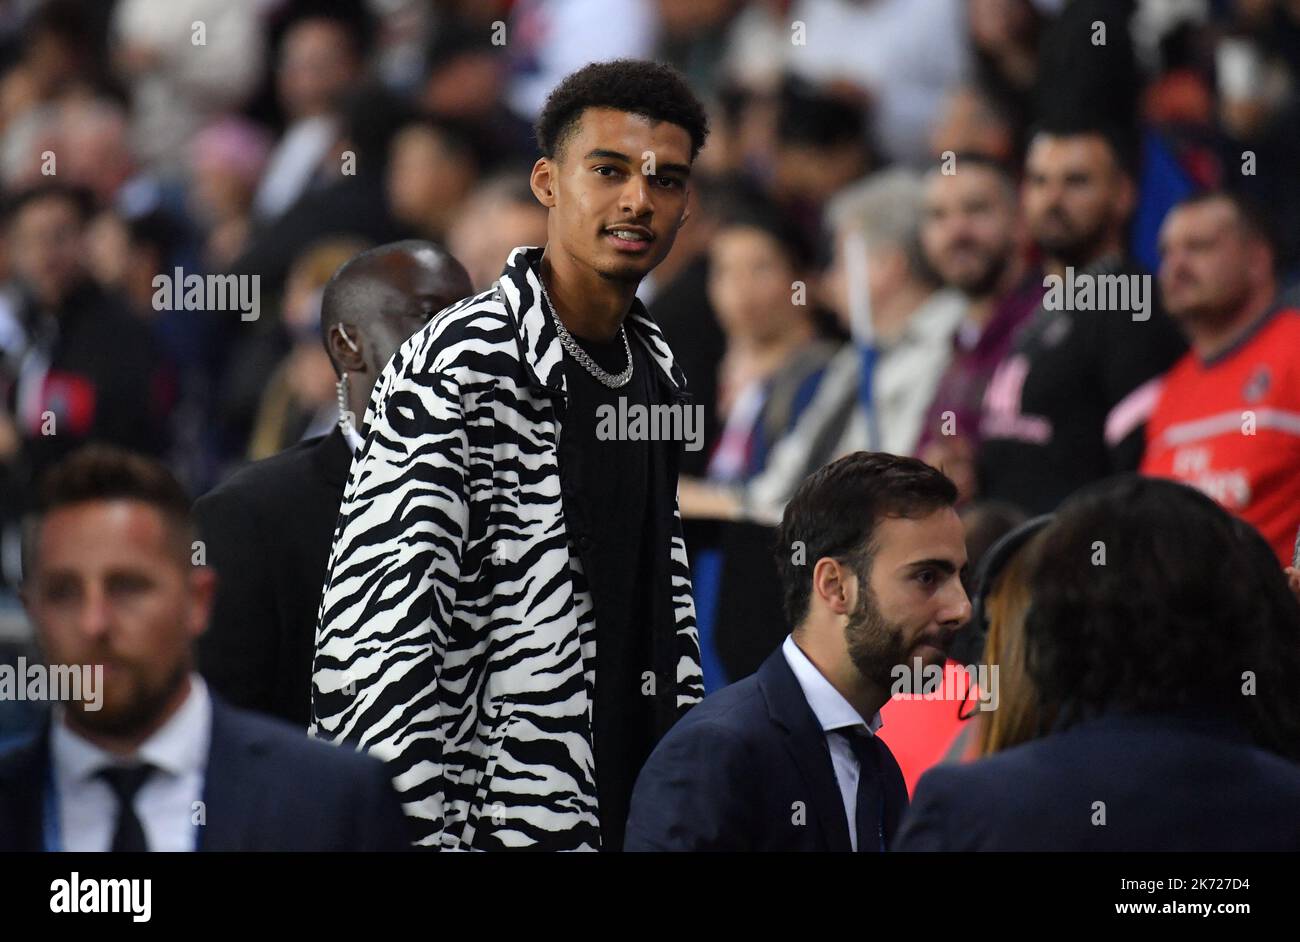 French basketball player Victor Wembanyama attending the Ligue 1 match  Paris Saint-Germain (PSG) v Olympique de Marseille (OM) at Parc des Princes  stadium on October 16, 2022 in Paris, France. Photo by